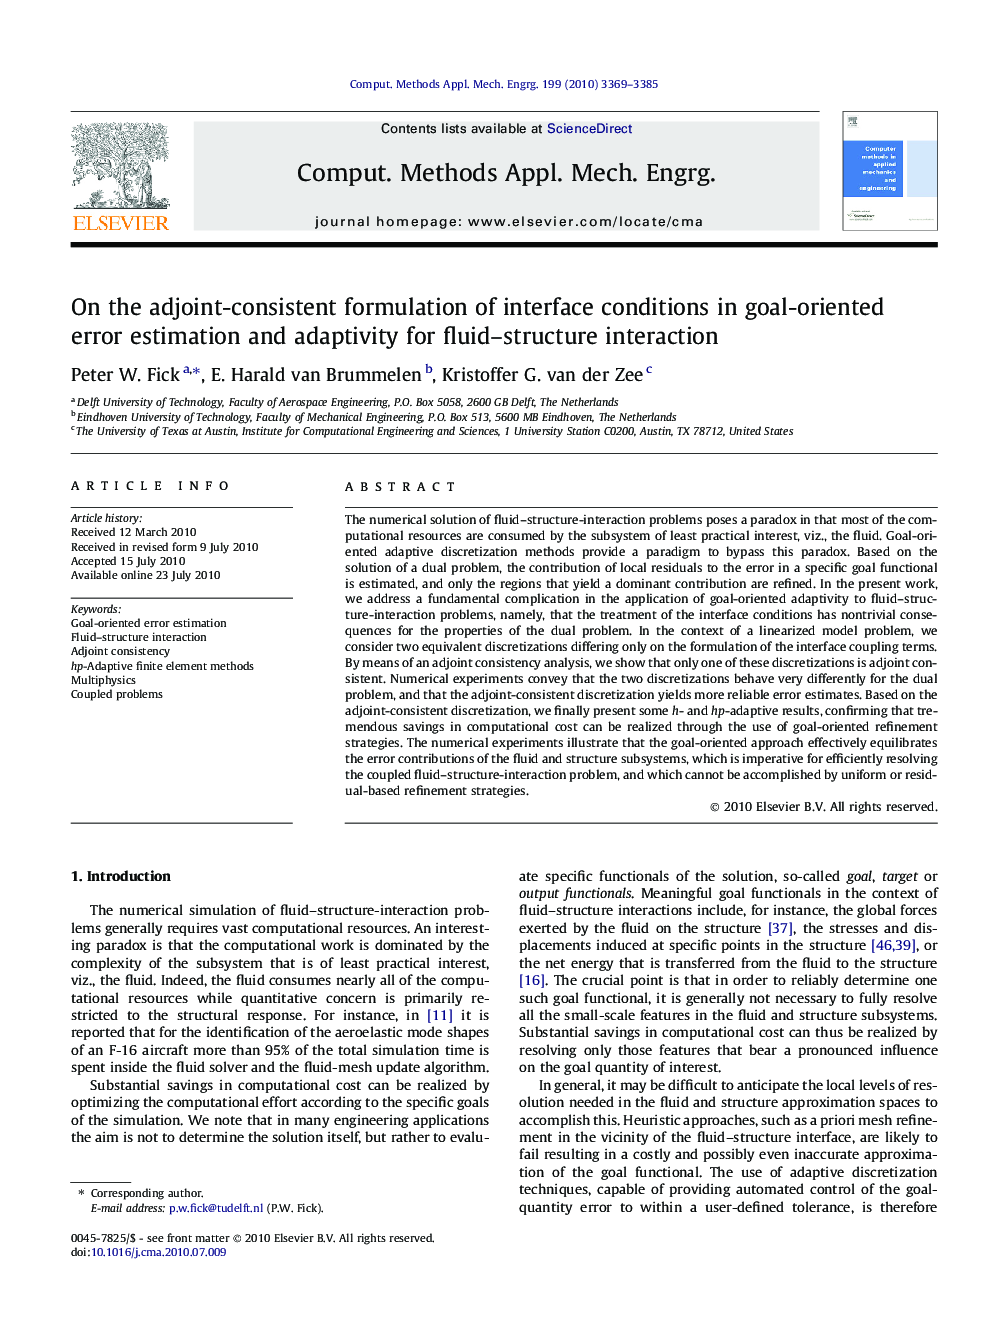 On the adjoint-consistent formulation of interface conditions in goal-oriented error estimation and adaptivity for fluid–structure interaction